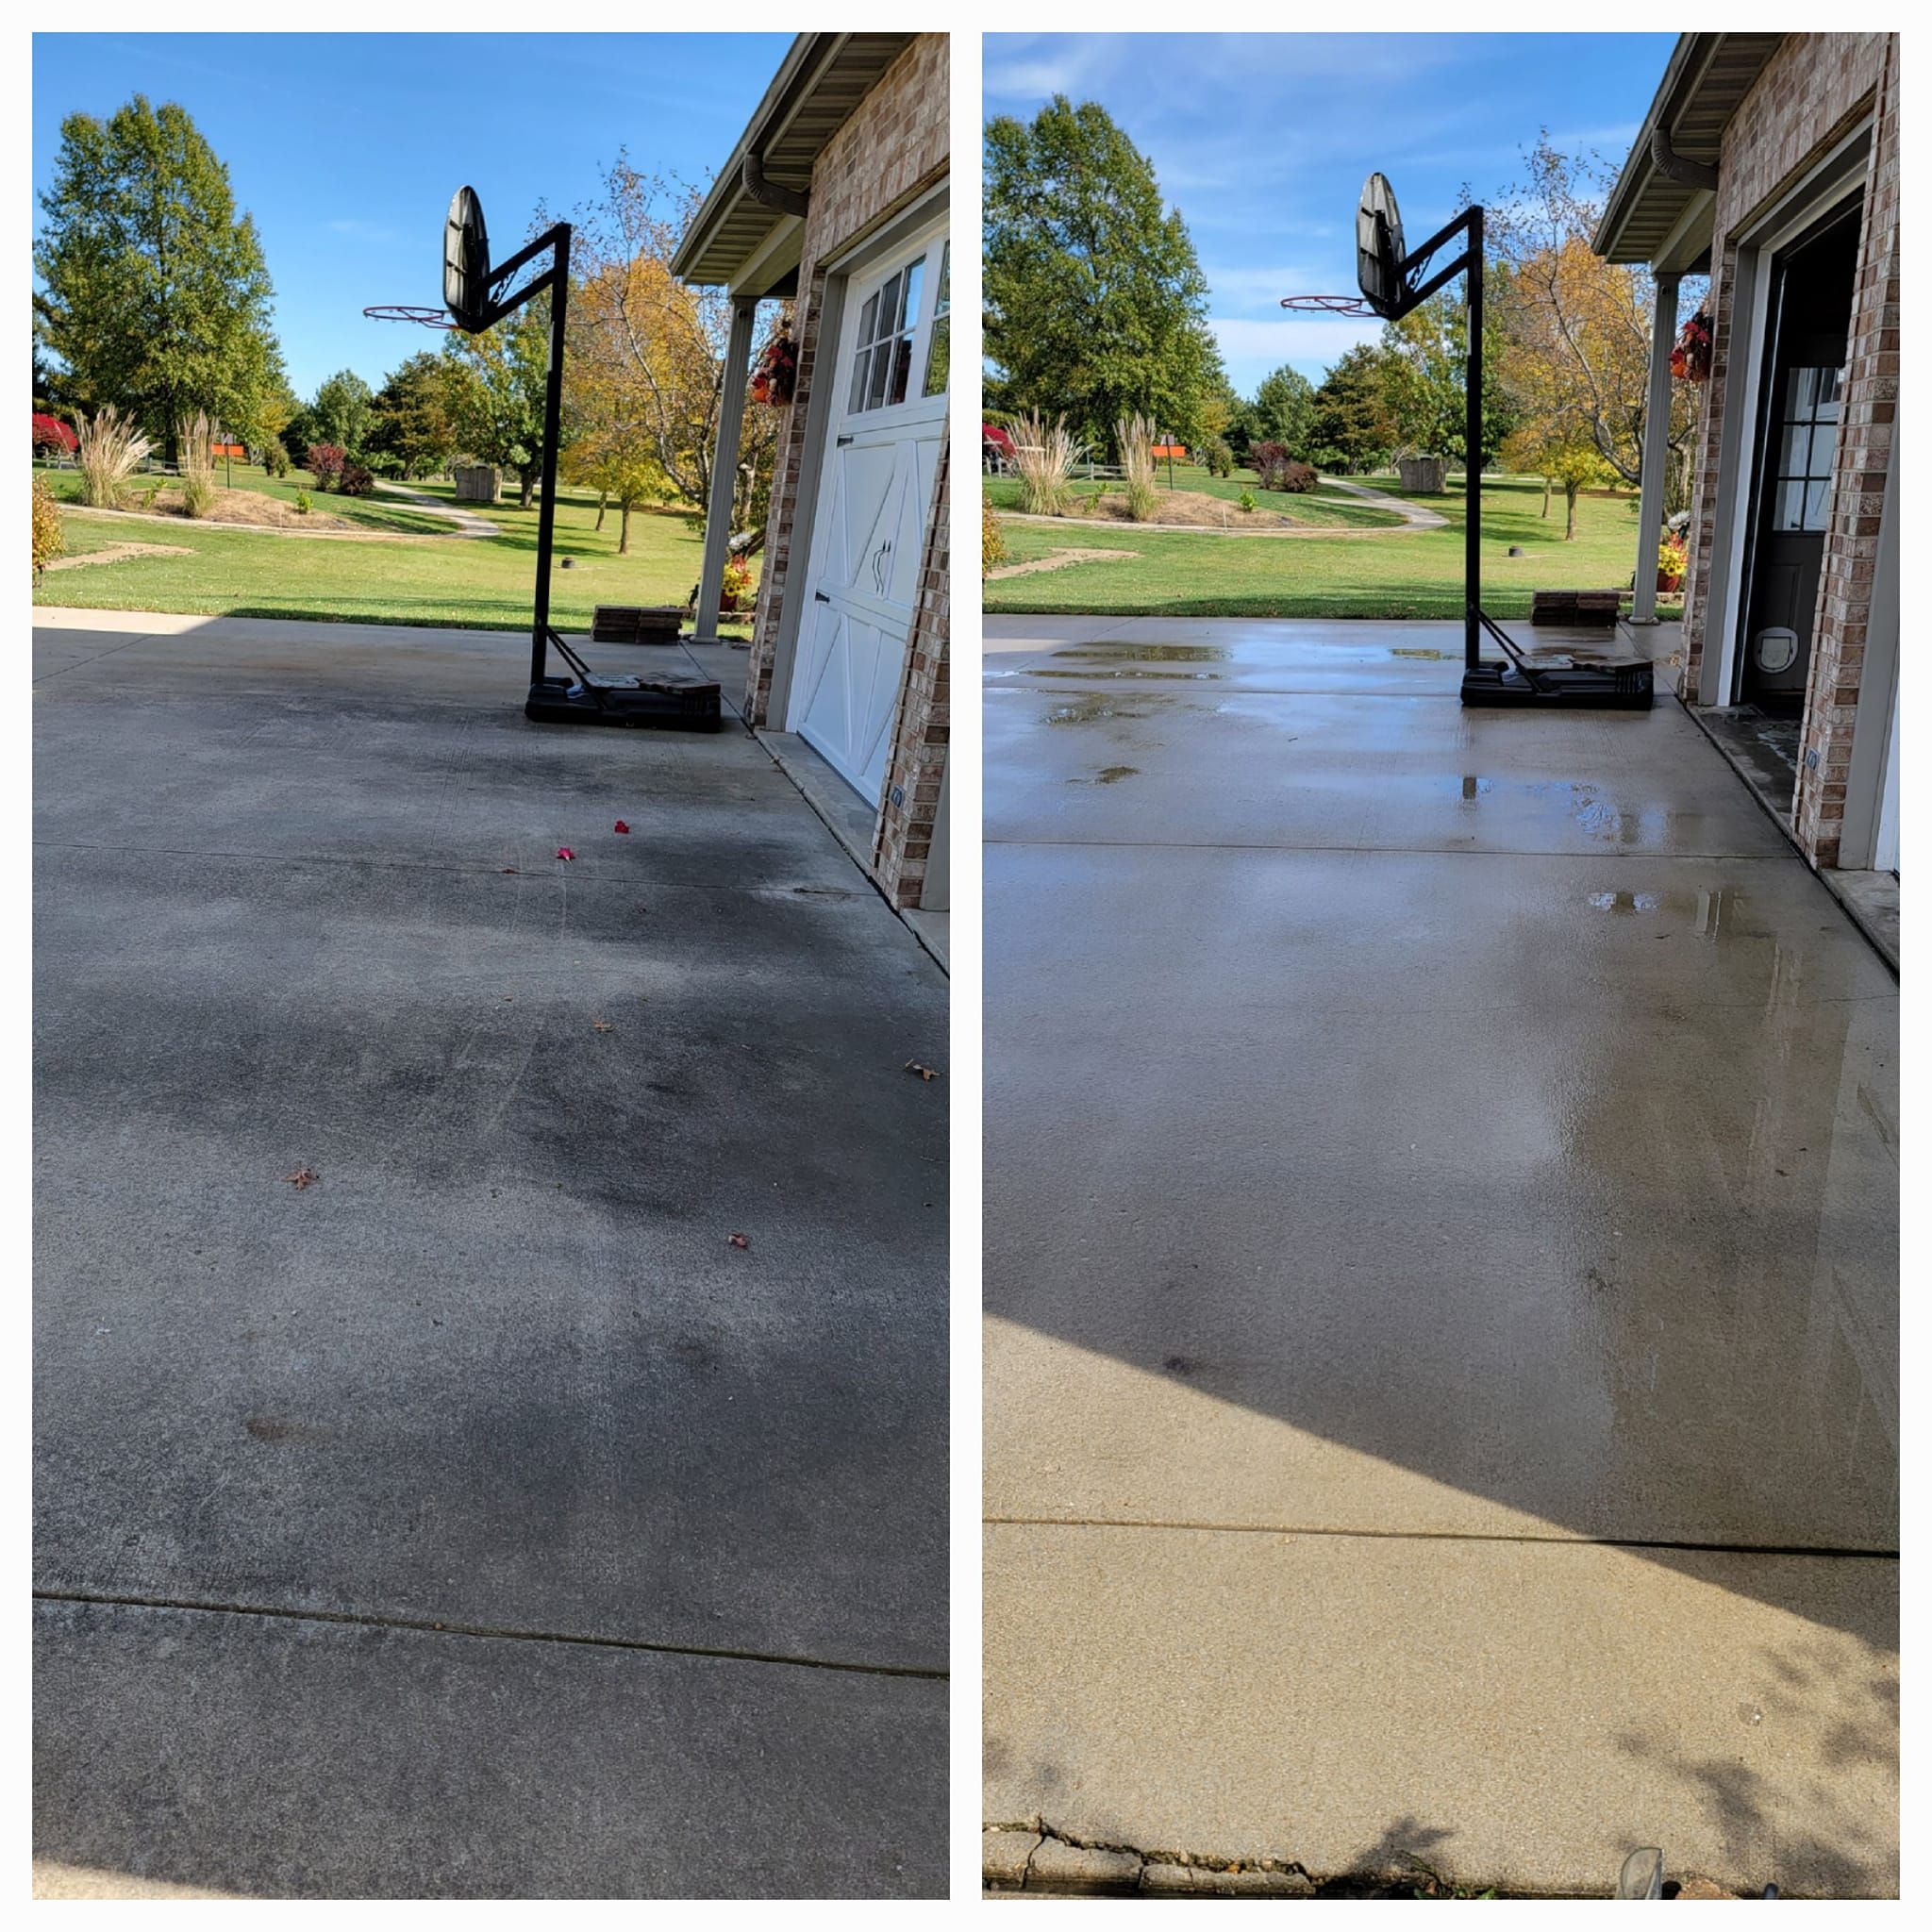 Other Services for Marten Pressure Washing in Litchfield, IL